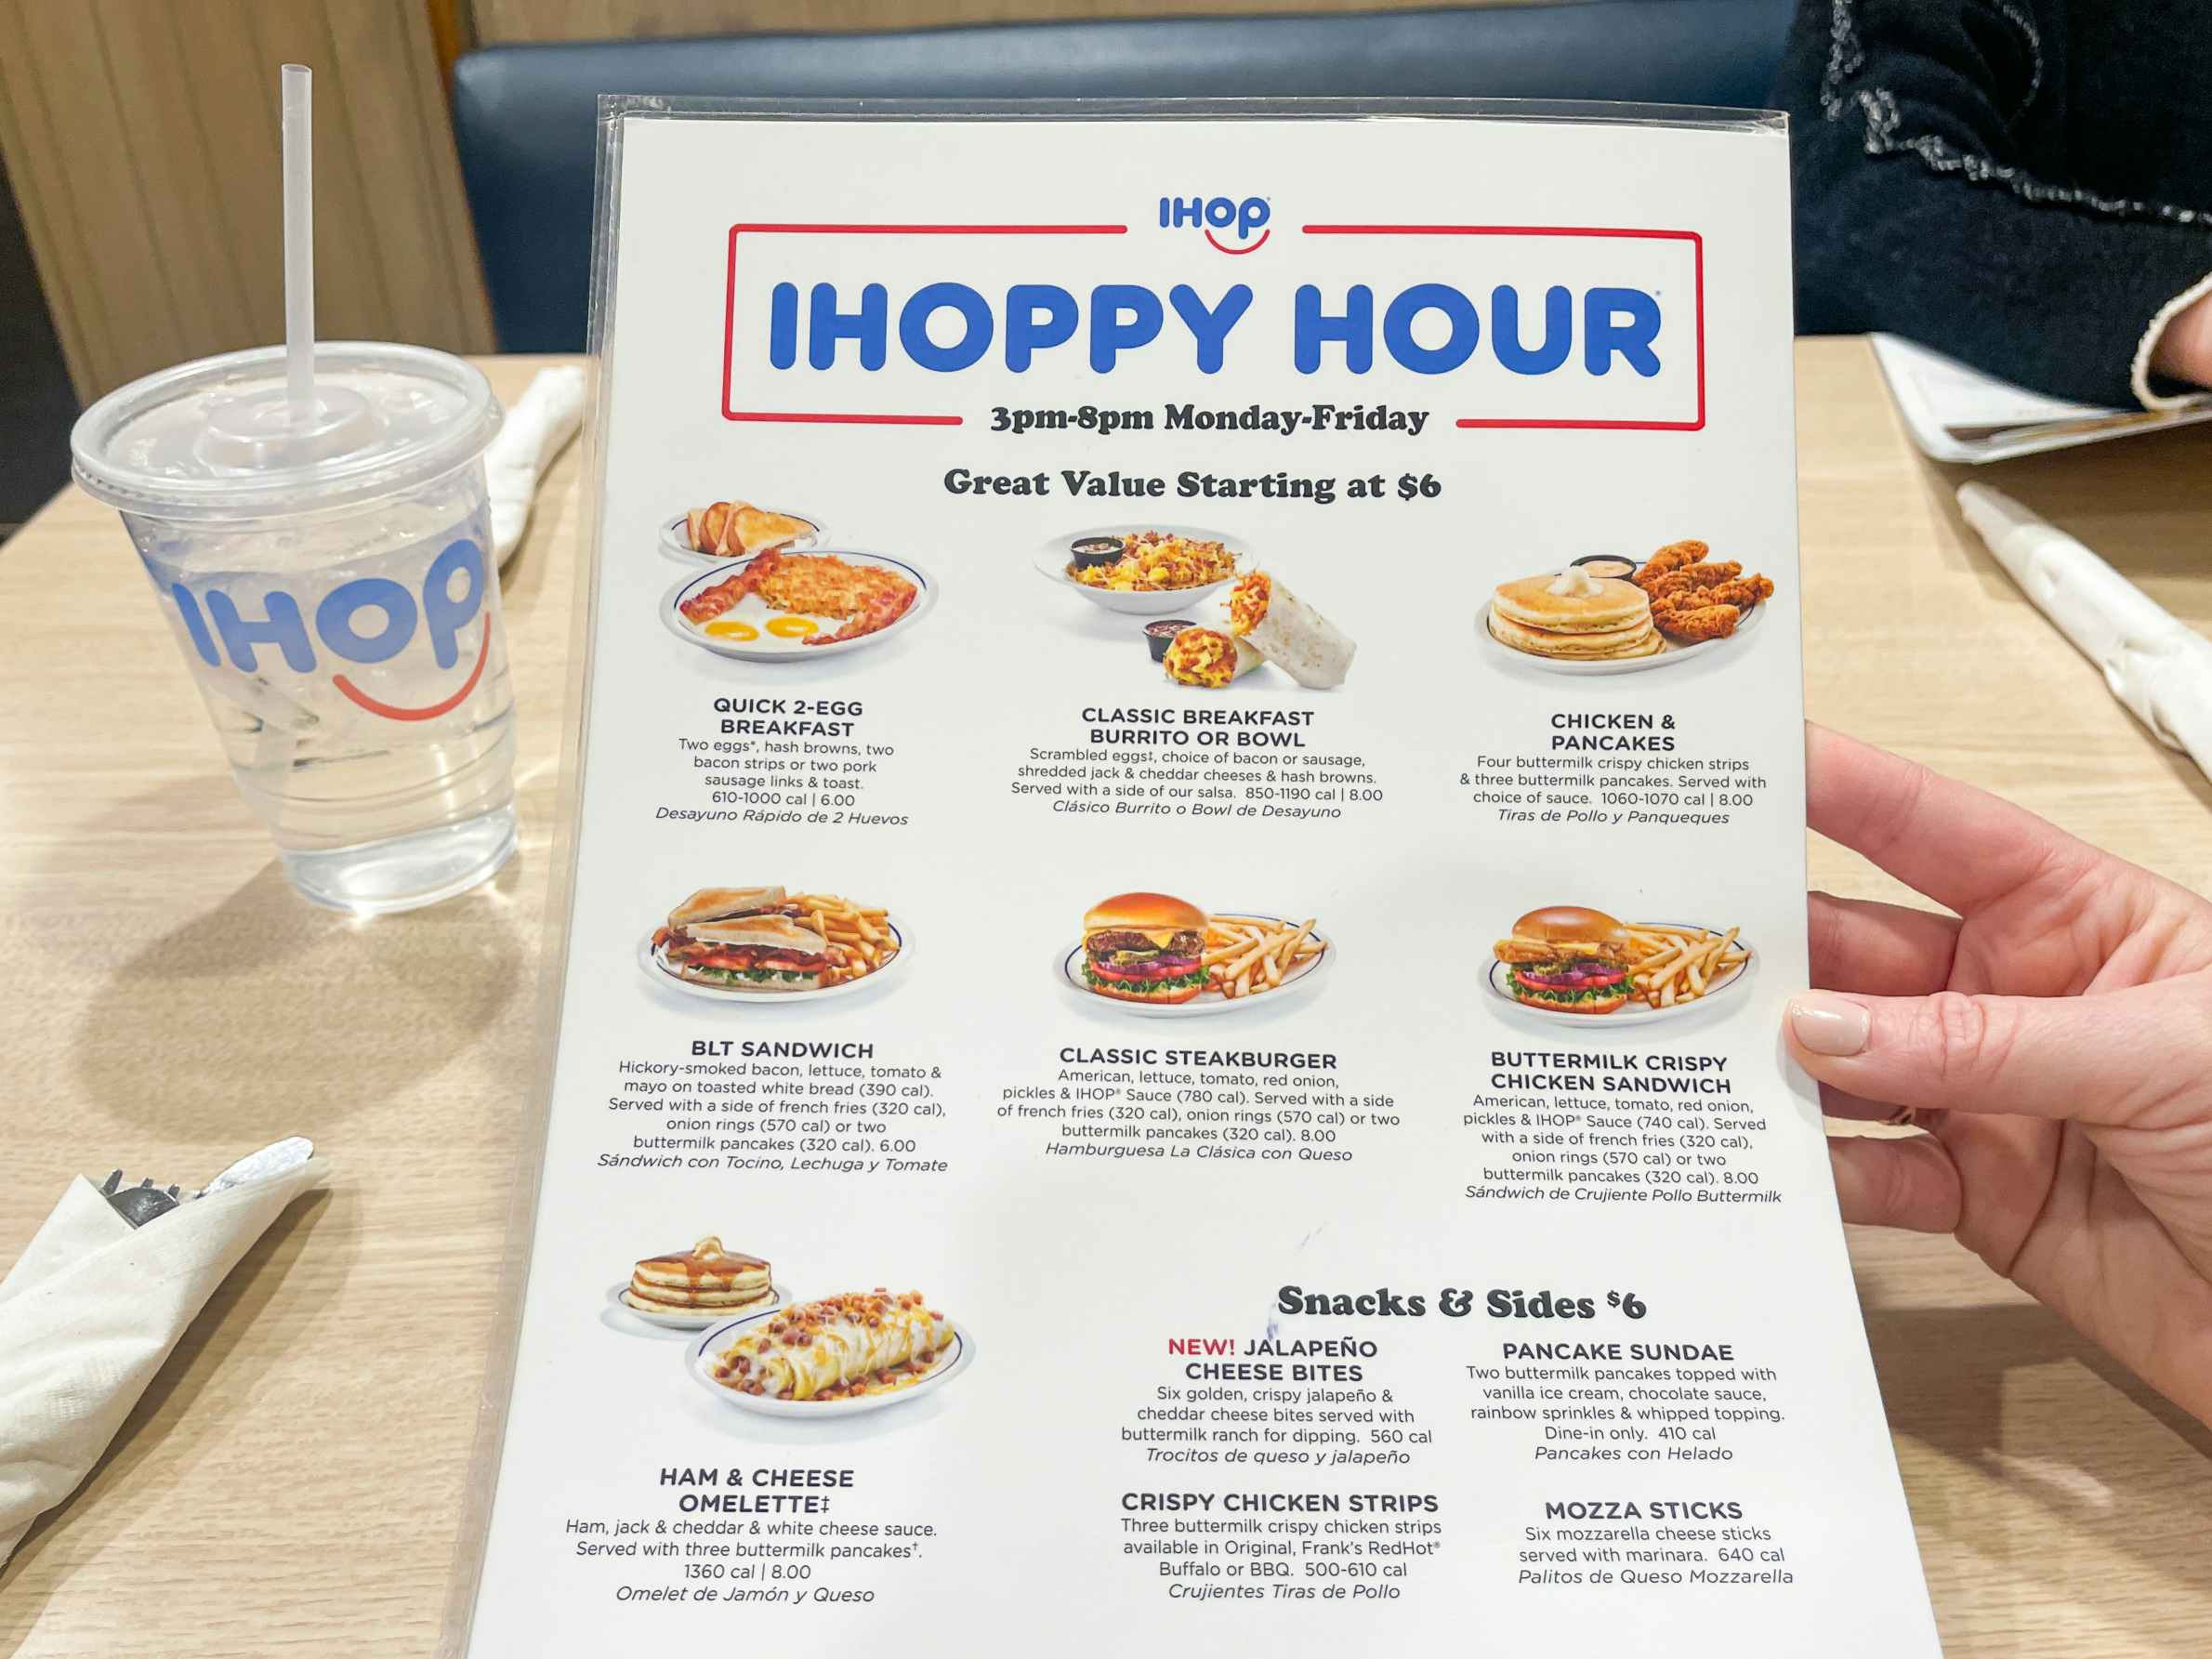 The IHOP IHOPPY HOUR menu showing the available specials